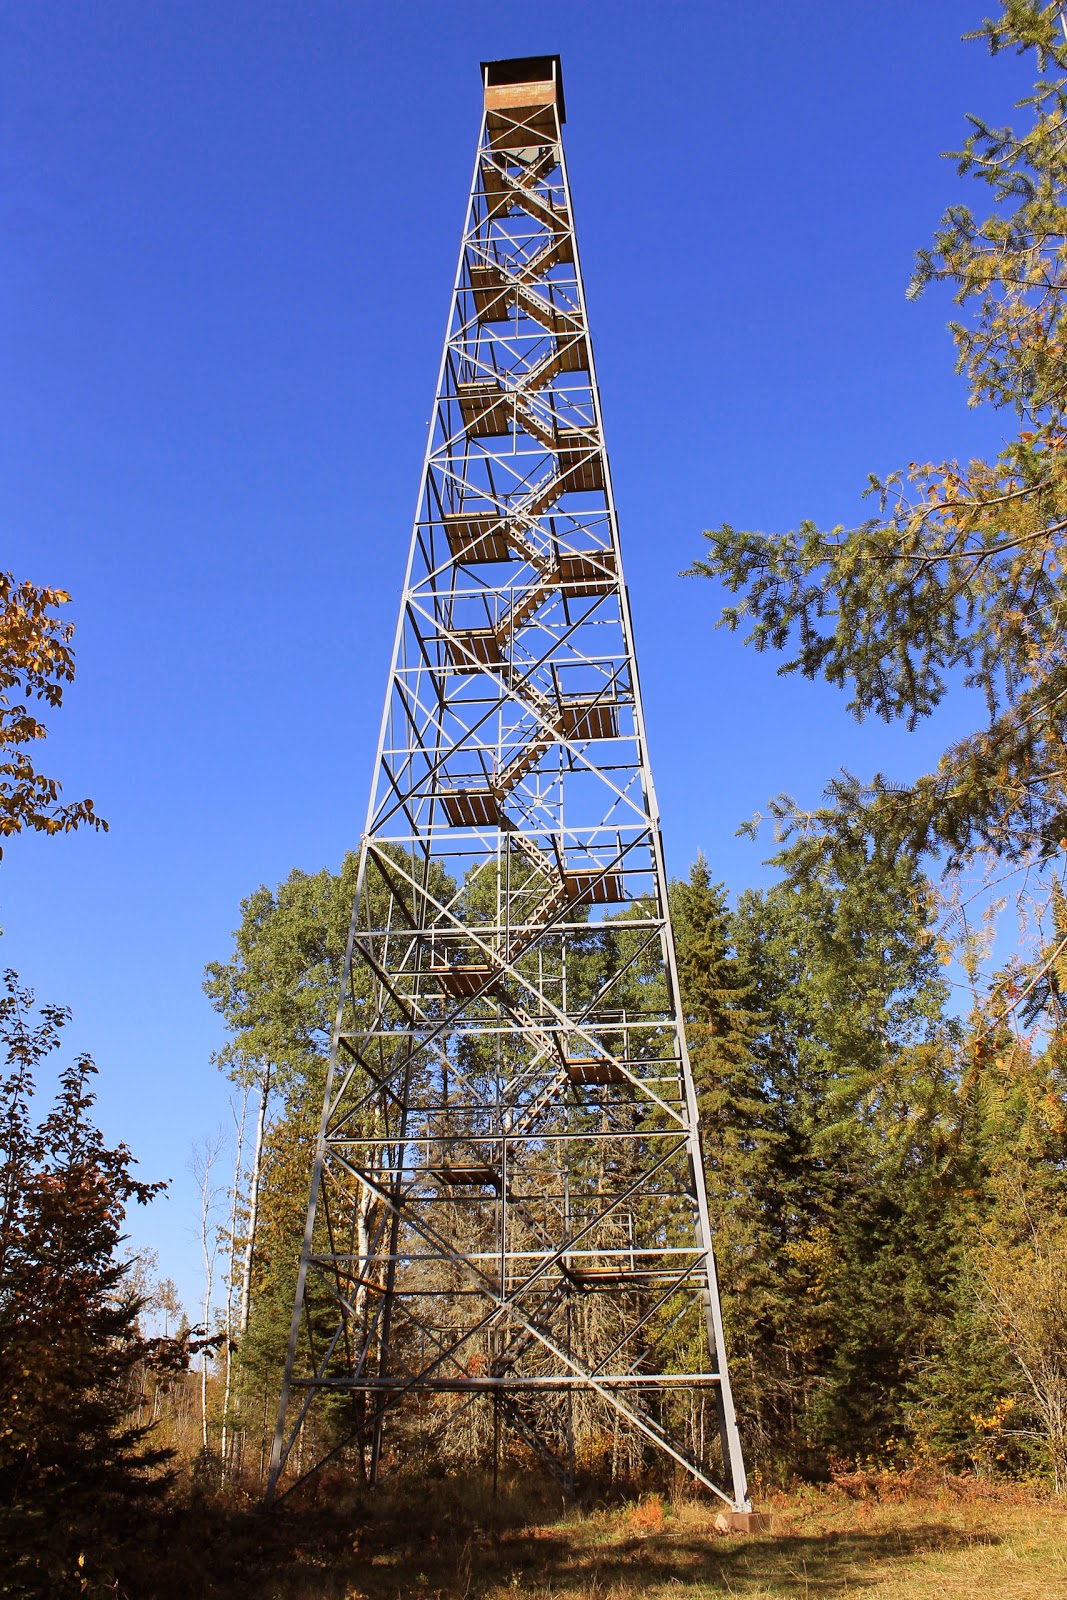 Minnesota's Historical Fire Lookout Towers: August 20121067 x 1600